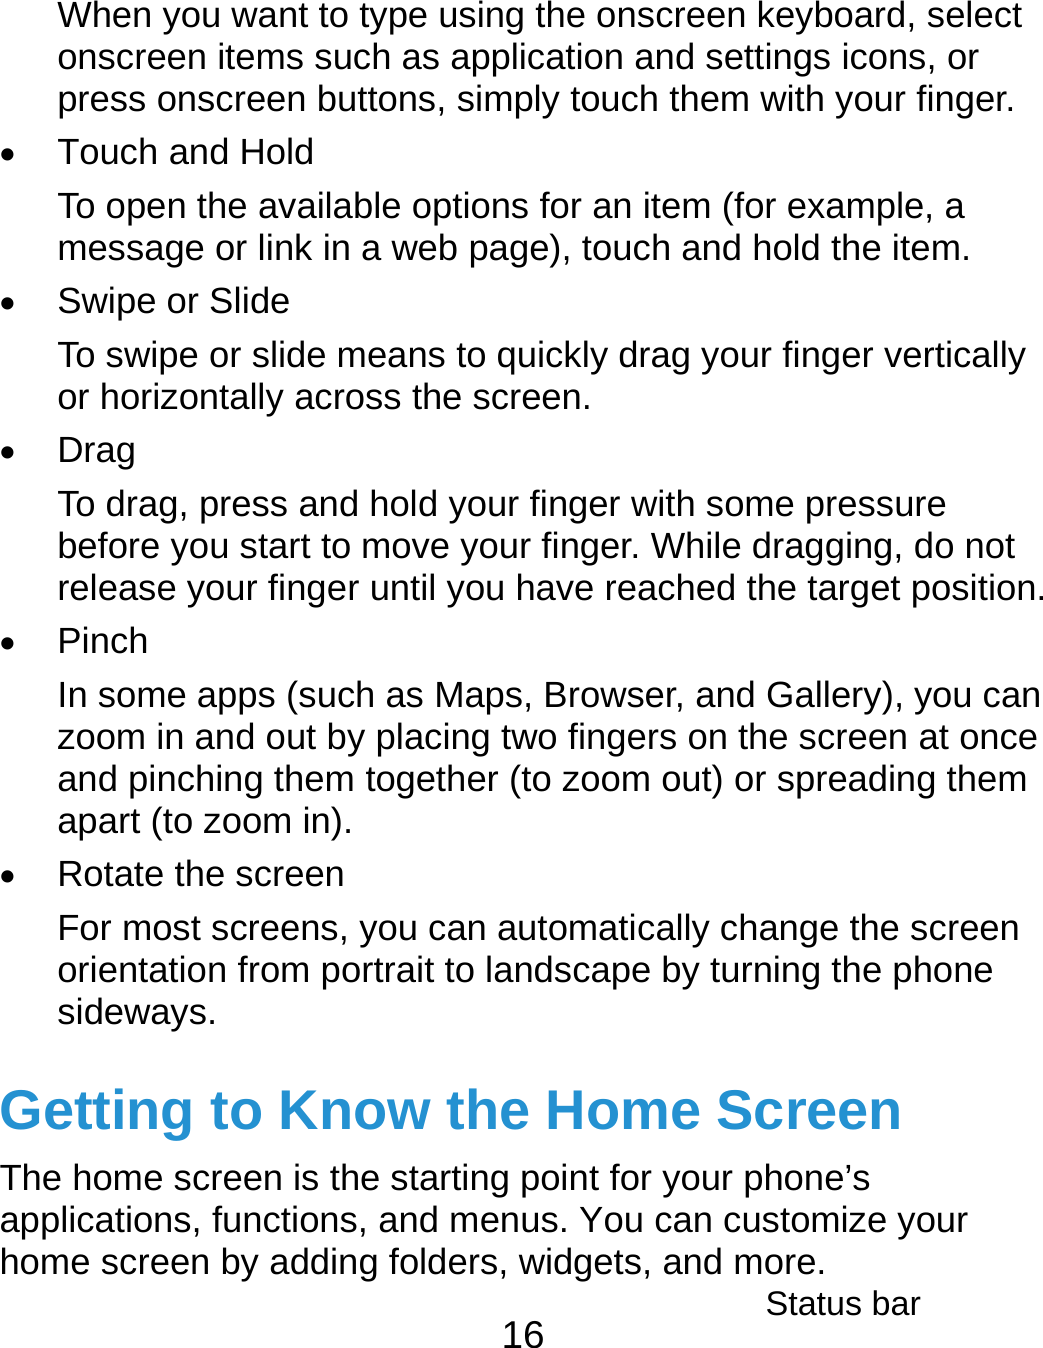  16 When you want to type using the onscreen keyboard, select onscreen items such as application and settings icons, or press onscreen buttons, simply touch them with your finger.  Touch and Hold To open the available options for an item (for example, a message or link in a web page), touch and hold the item.  Swipe or Slide To swipe or slide means to quickly drag your finger vertically or horizontally across the screen.  Drag To drag, press and hold your finger with some pressure before you start to move your finger. While dragging, do not release your finger until you have reached the target position.  Pinch In some apps (such as Maps, Browser, and Gallery), you can zoom in and out by placing two fingers on the screen at once and pinching them together (to zoom out) or spreading them apart (to zoom in).  Rotate the screen For most screens, you can automatically change the screen orientation from portrait to landscape by turning the phone sideways. Getting to Know the Home Screen The home screen is the starting point for your phone’s applications, functions, and menus. You can customize your home screen by adding folders, widgets, and more. Status bar 